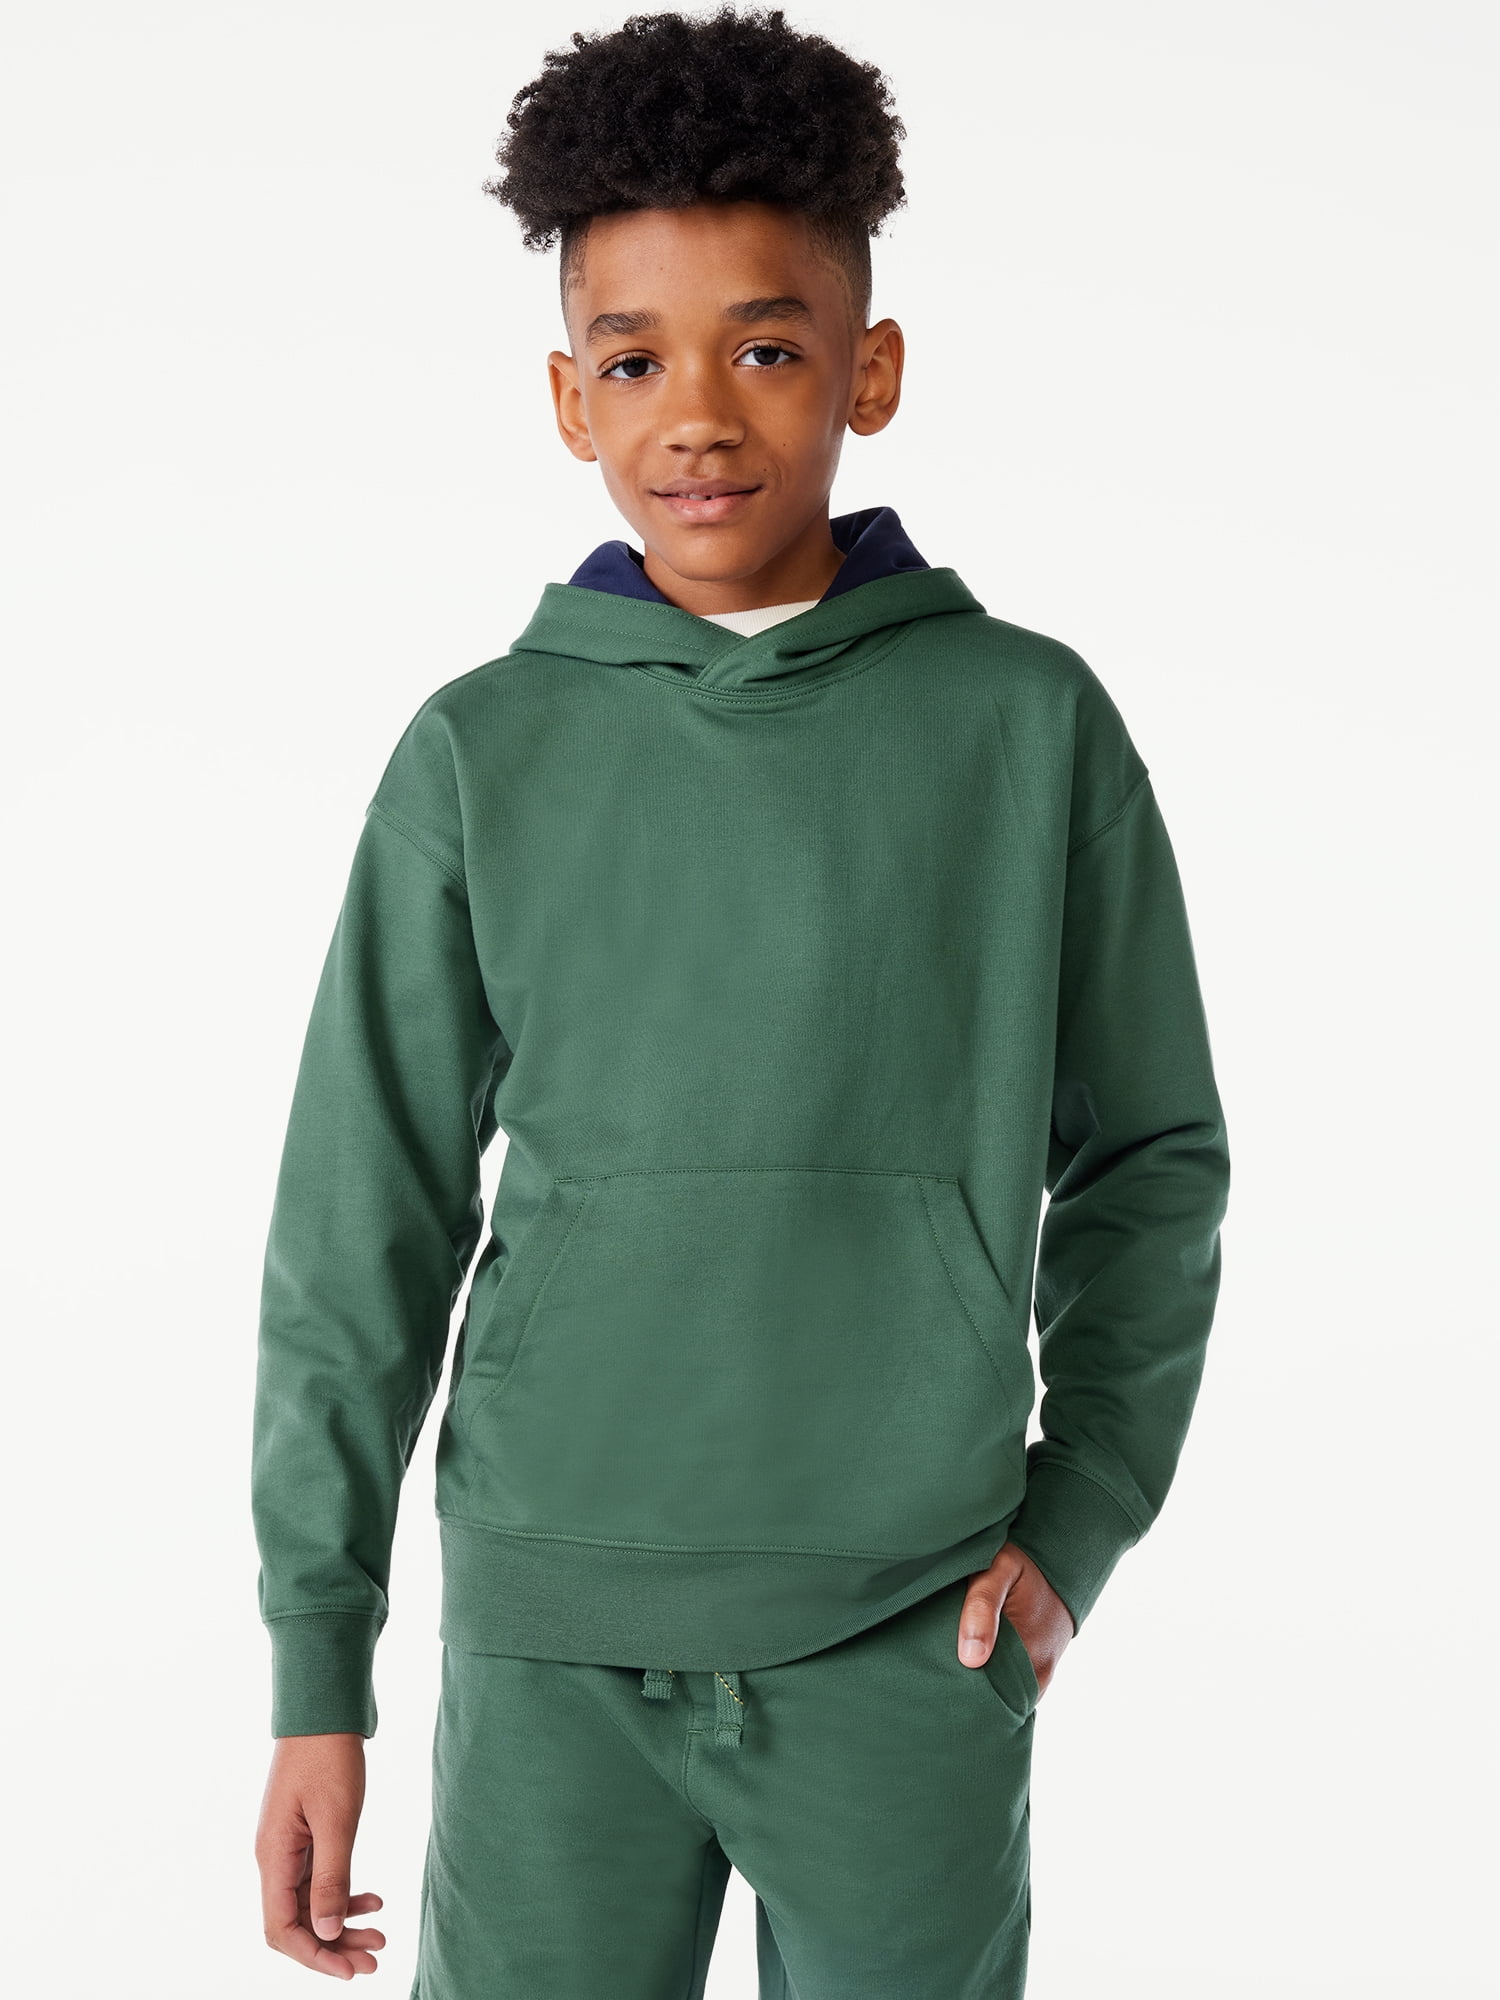 Free Assembly Boys Long Sleeve Graphic Hoodie, Sizes 4-18 - Walmart.com